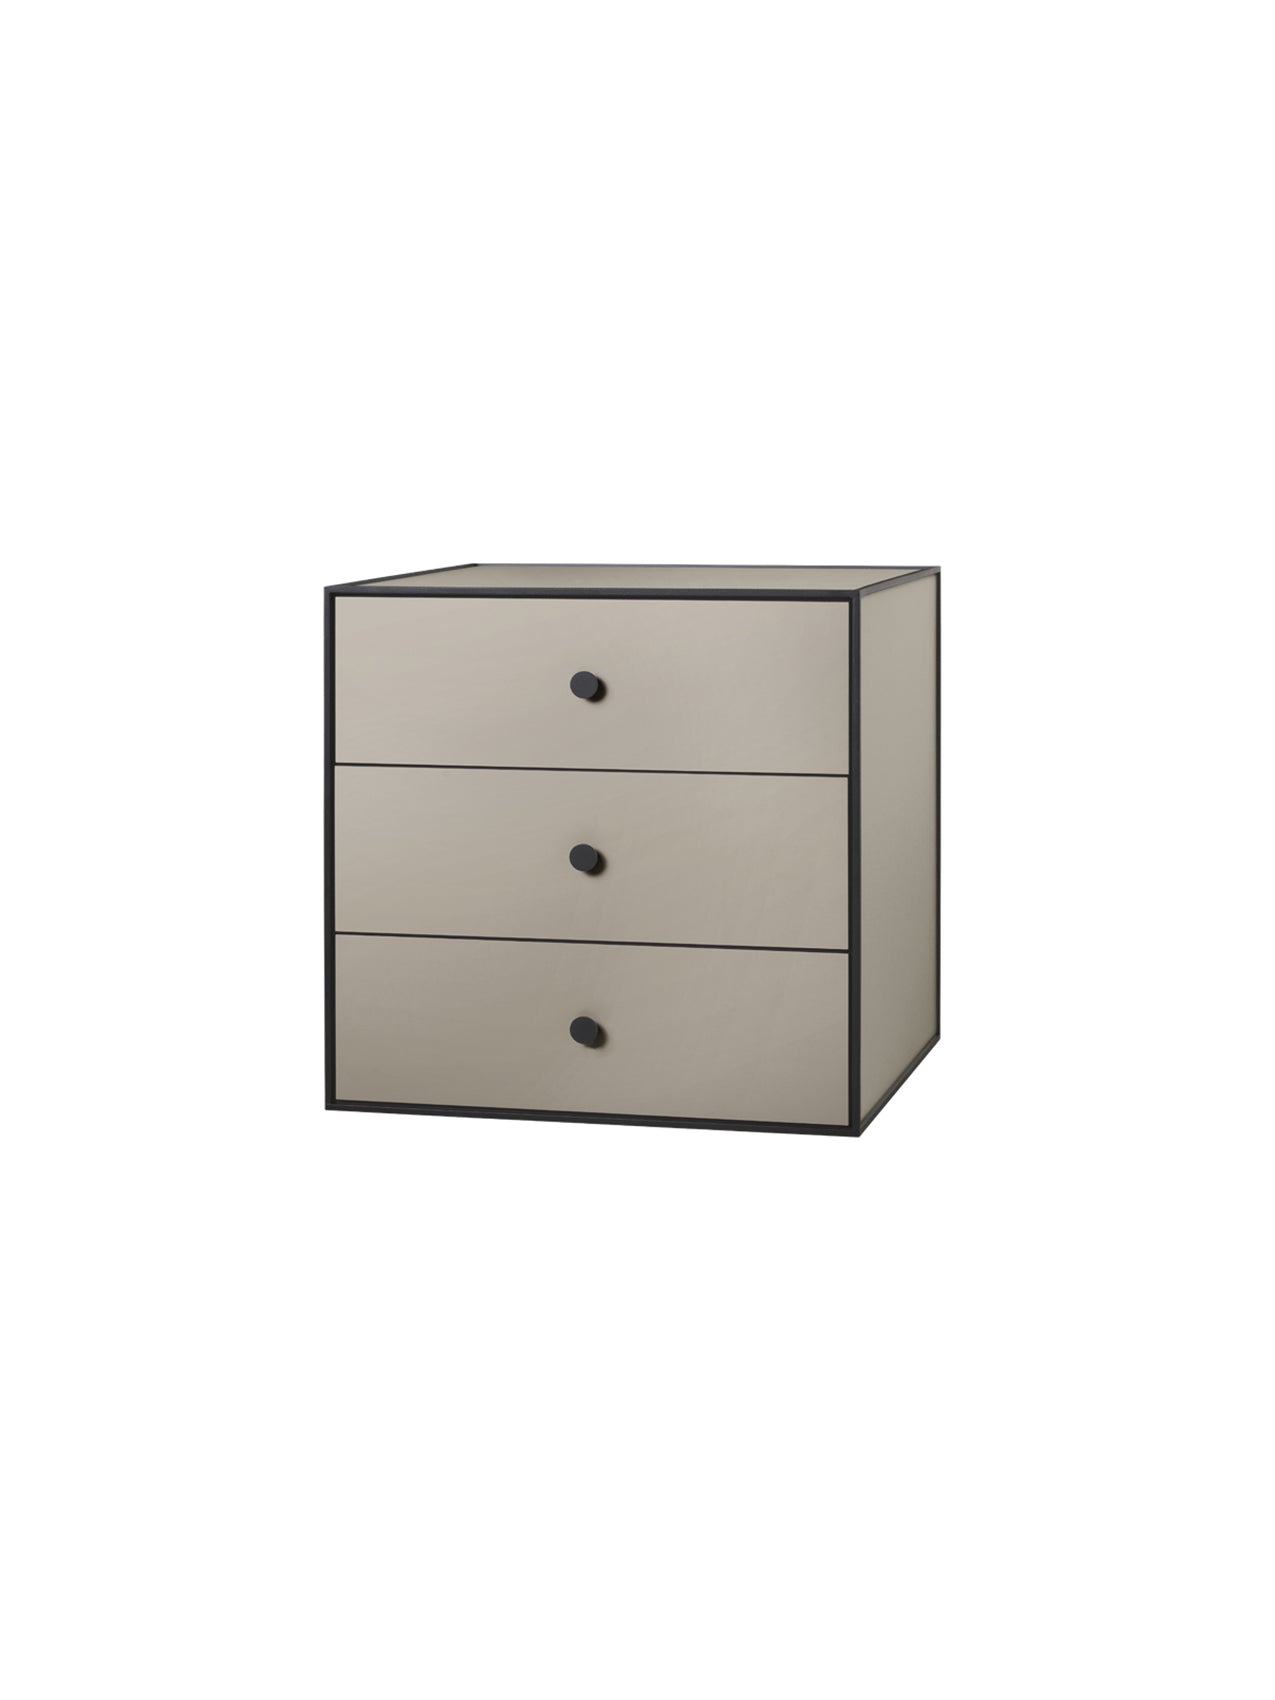 Large Frame with Drawer, Special Offers